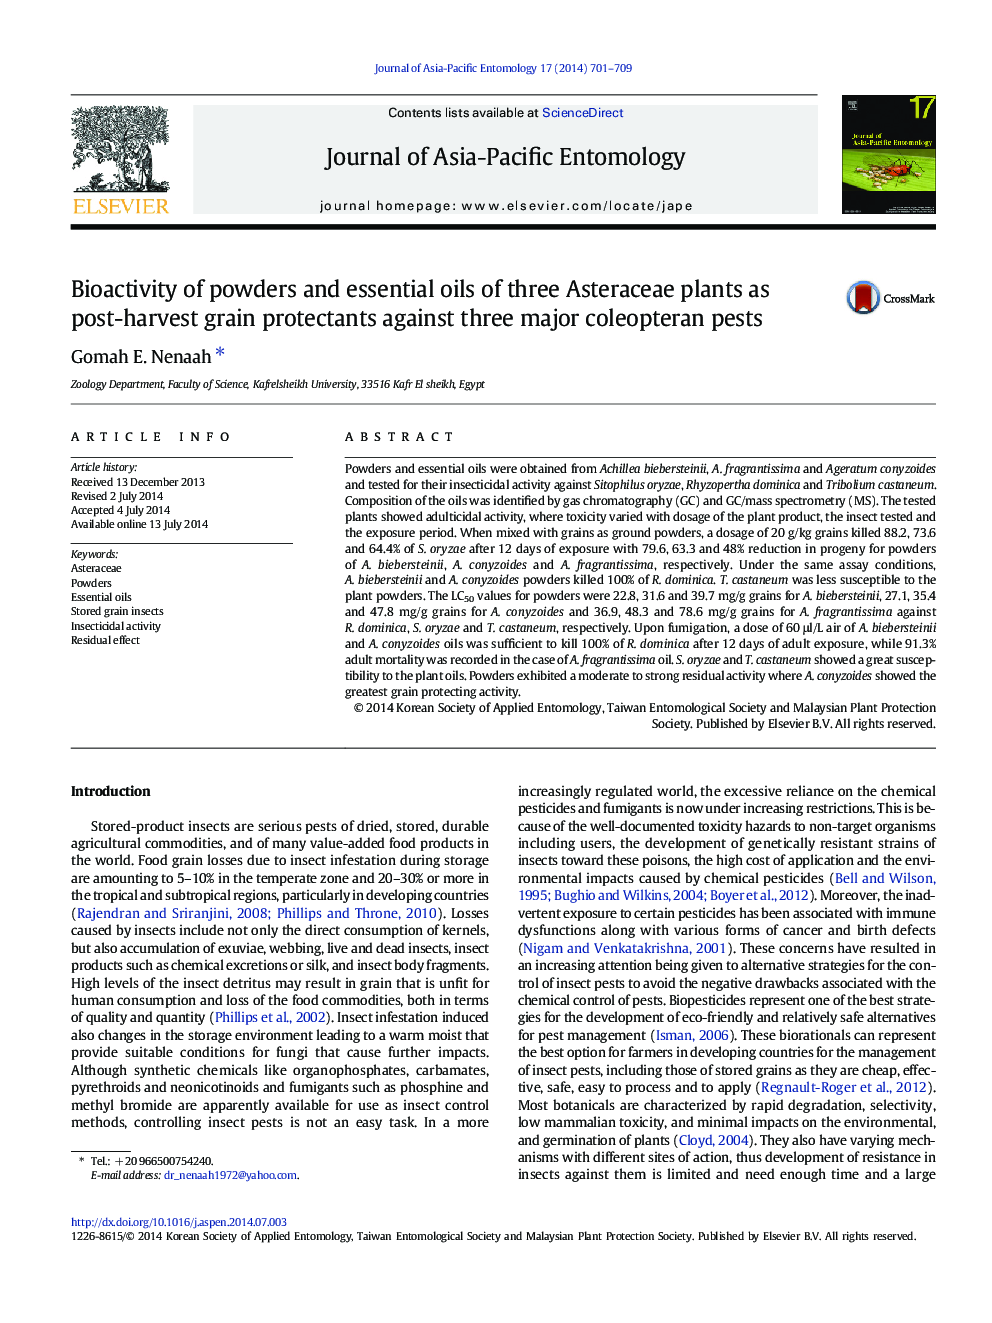 Bioactivity of powders and essential oils of three Asteraceae plants as post-harvest grain protectants against three major coleopteran pests